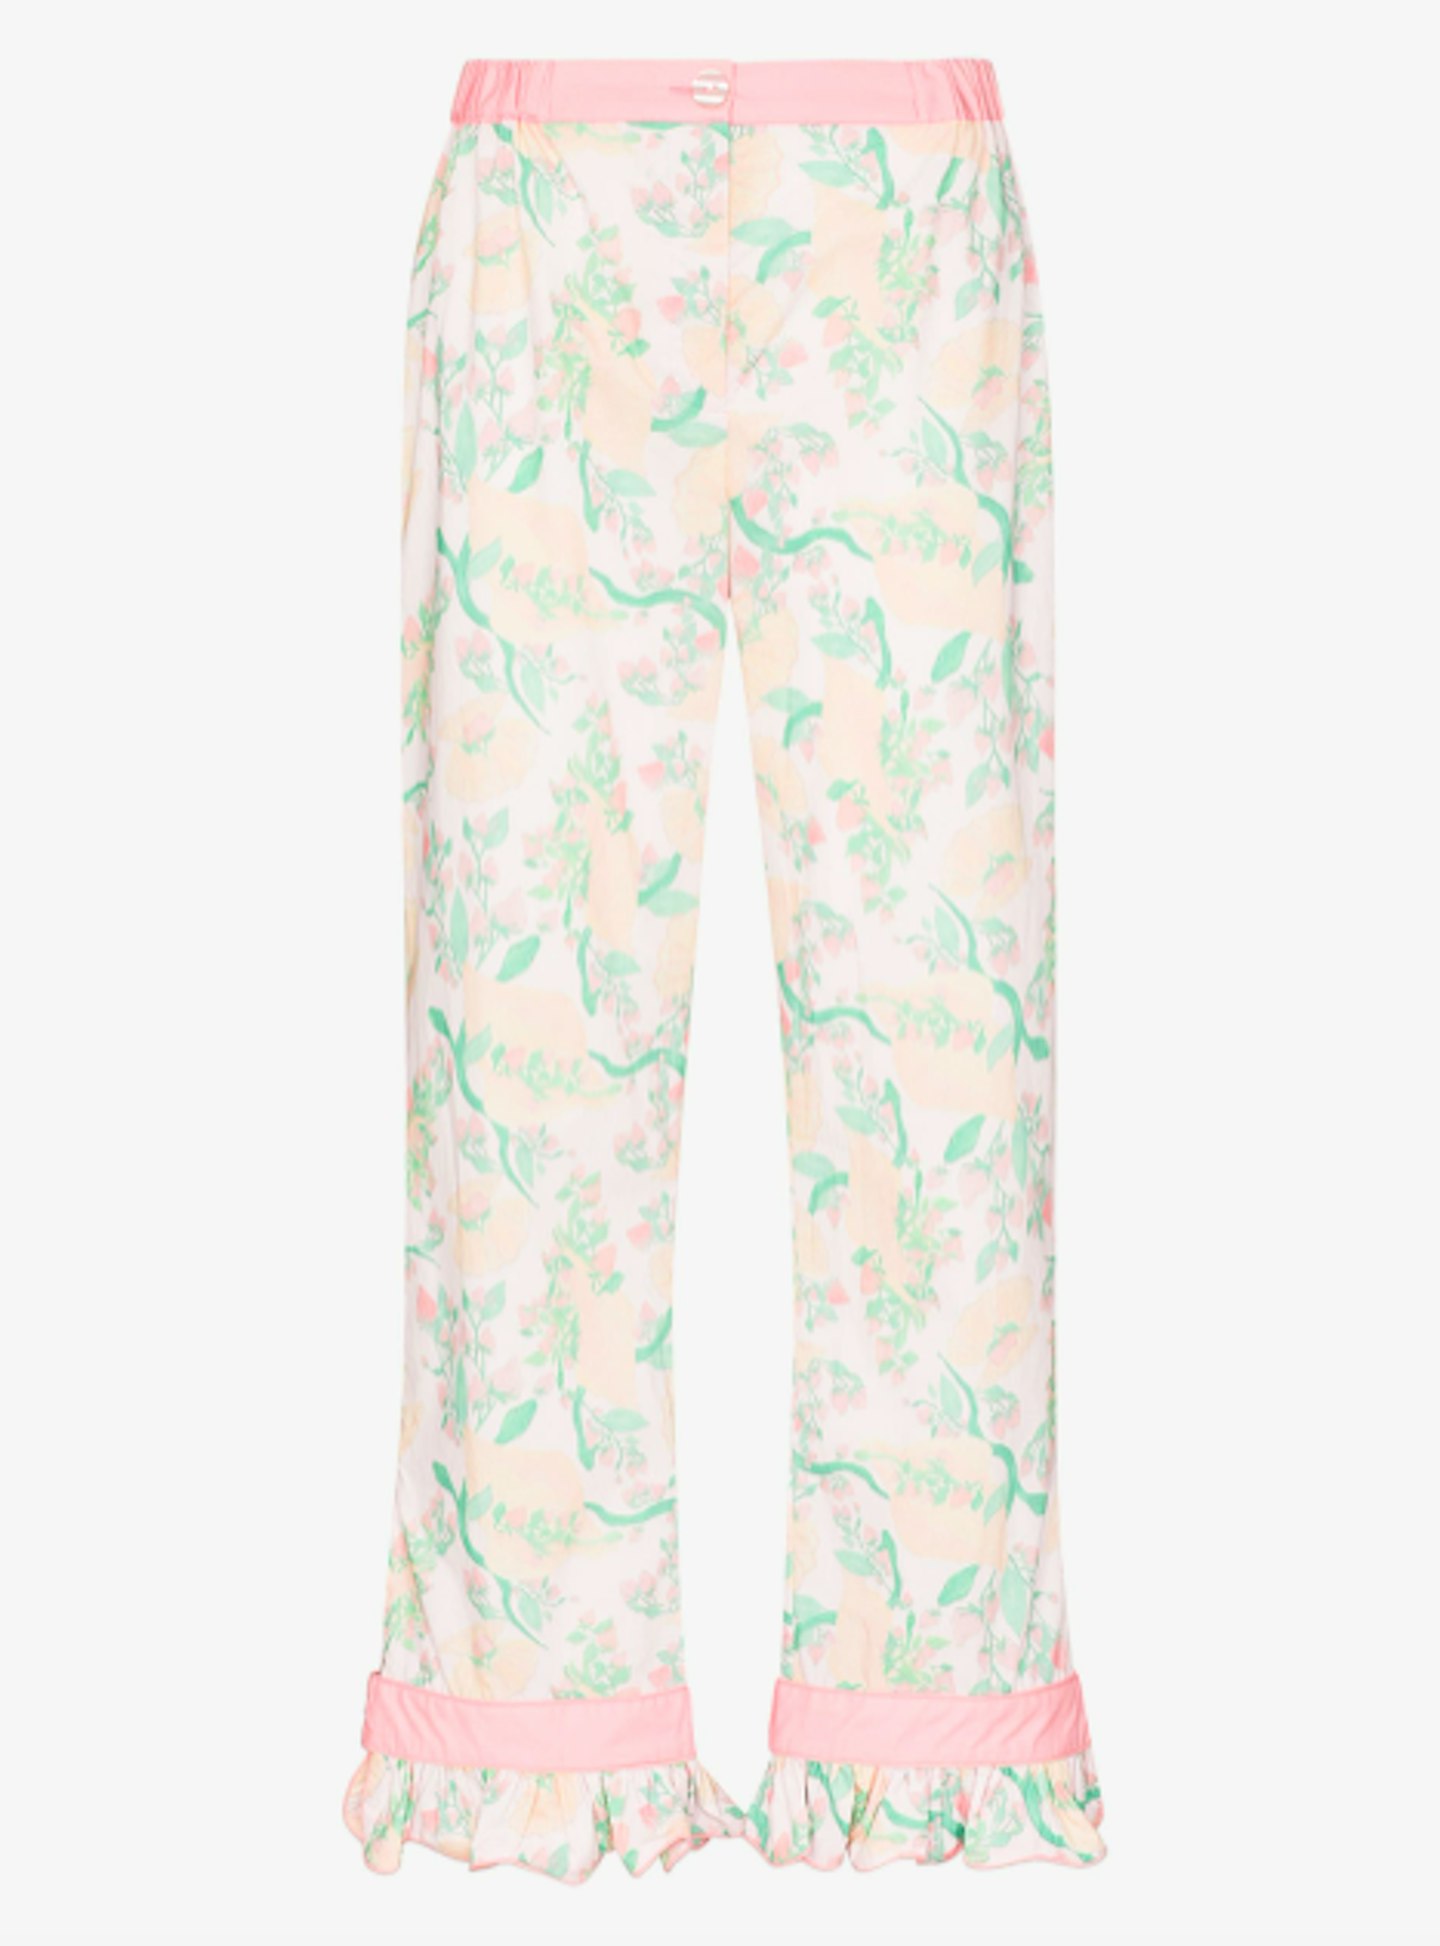 Helmstedt, Strawberry Print Pyjama Trousers, £265 at Browns